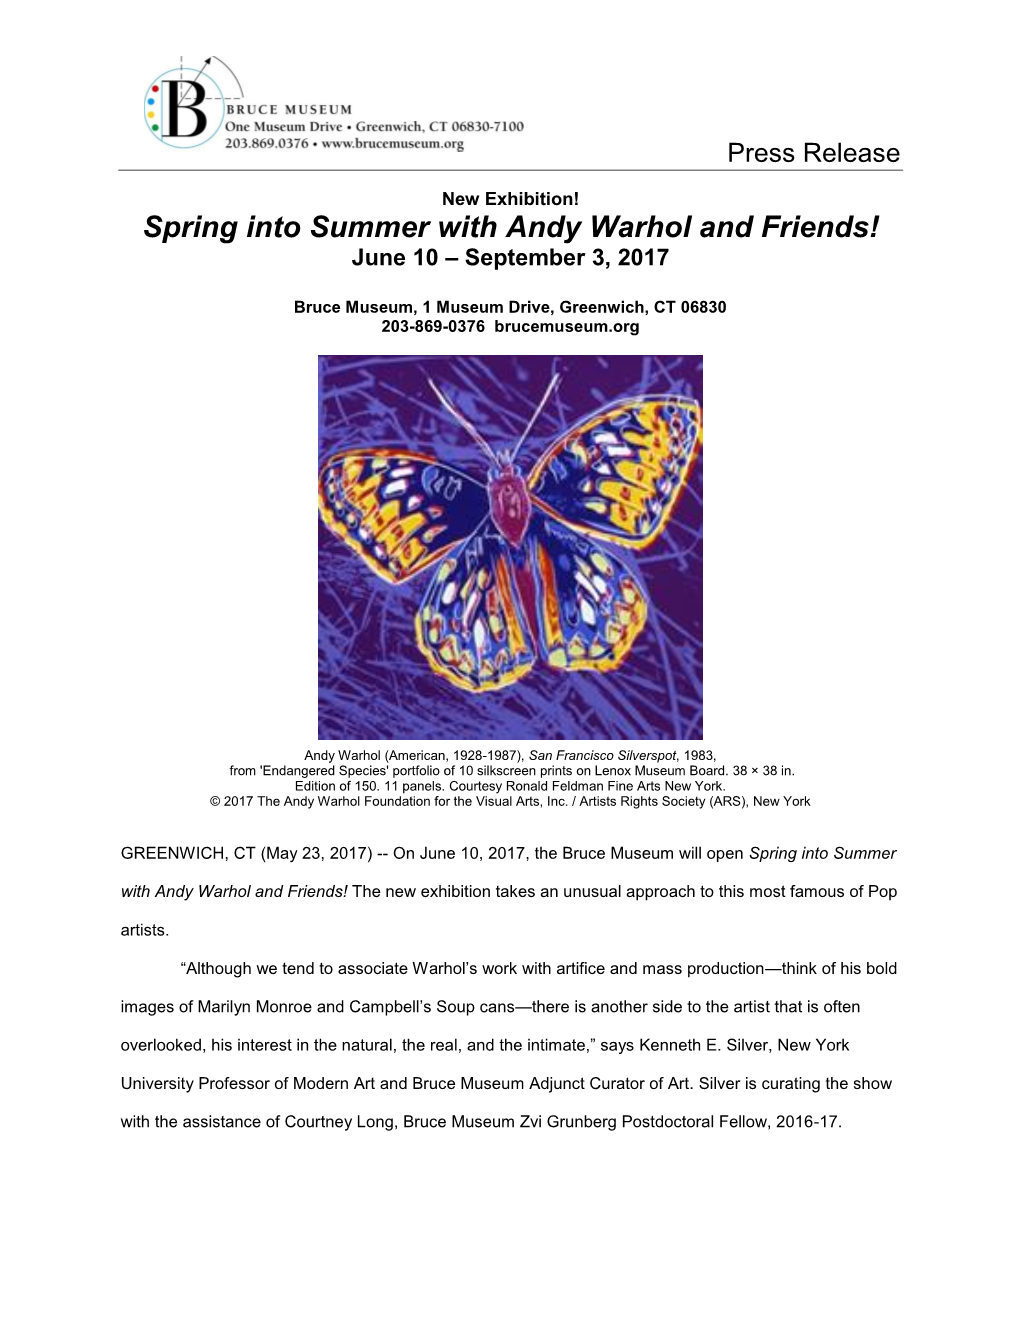 New Exhibition! Spring Into Summer with Andy Warhol and Friends! June 10 – September 3, 2017